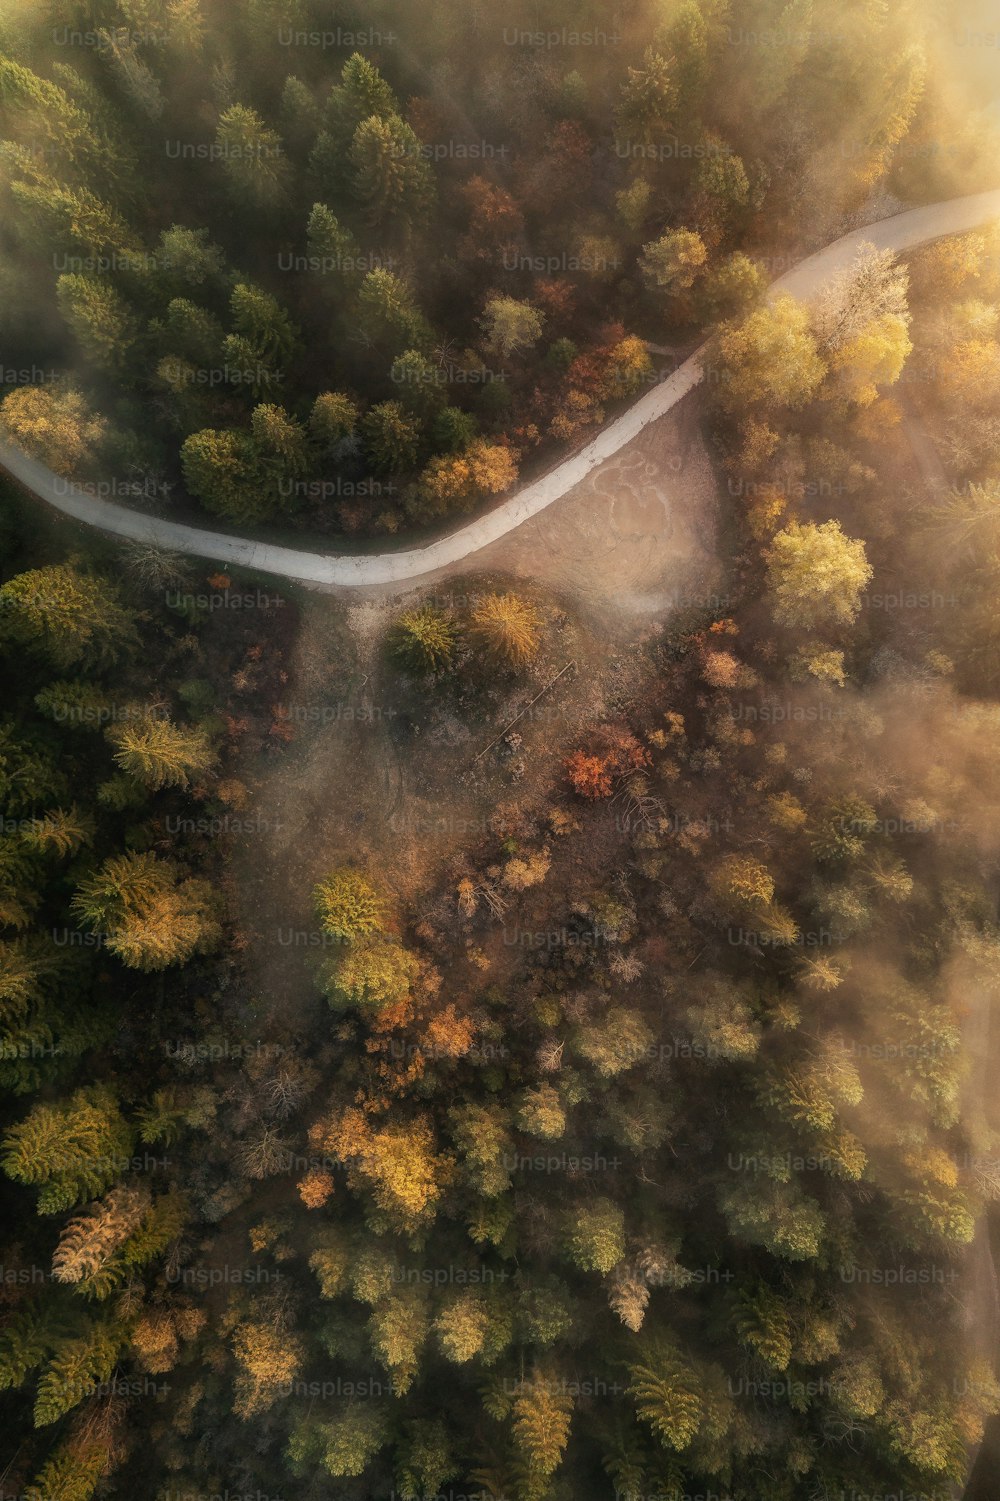 a bird's eye view of a winding road in the middle of a forest